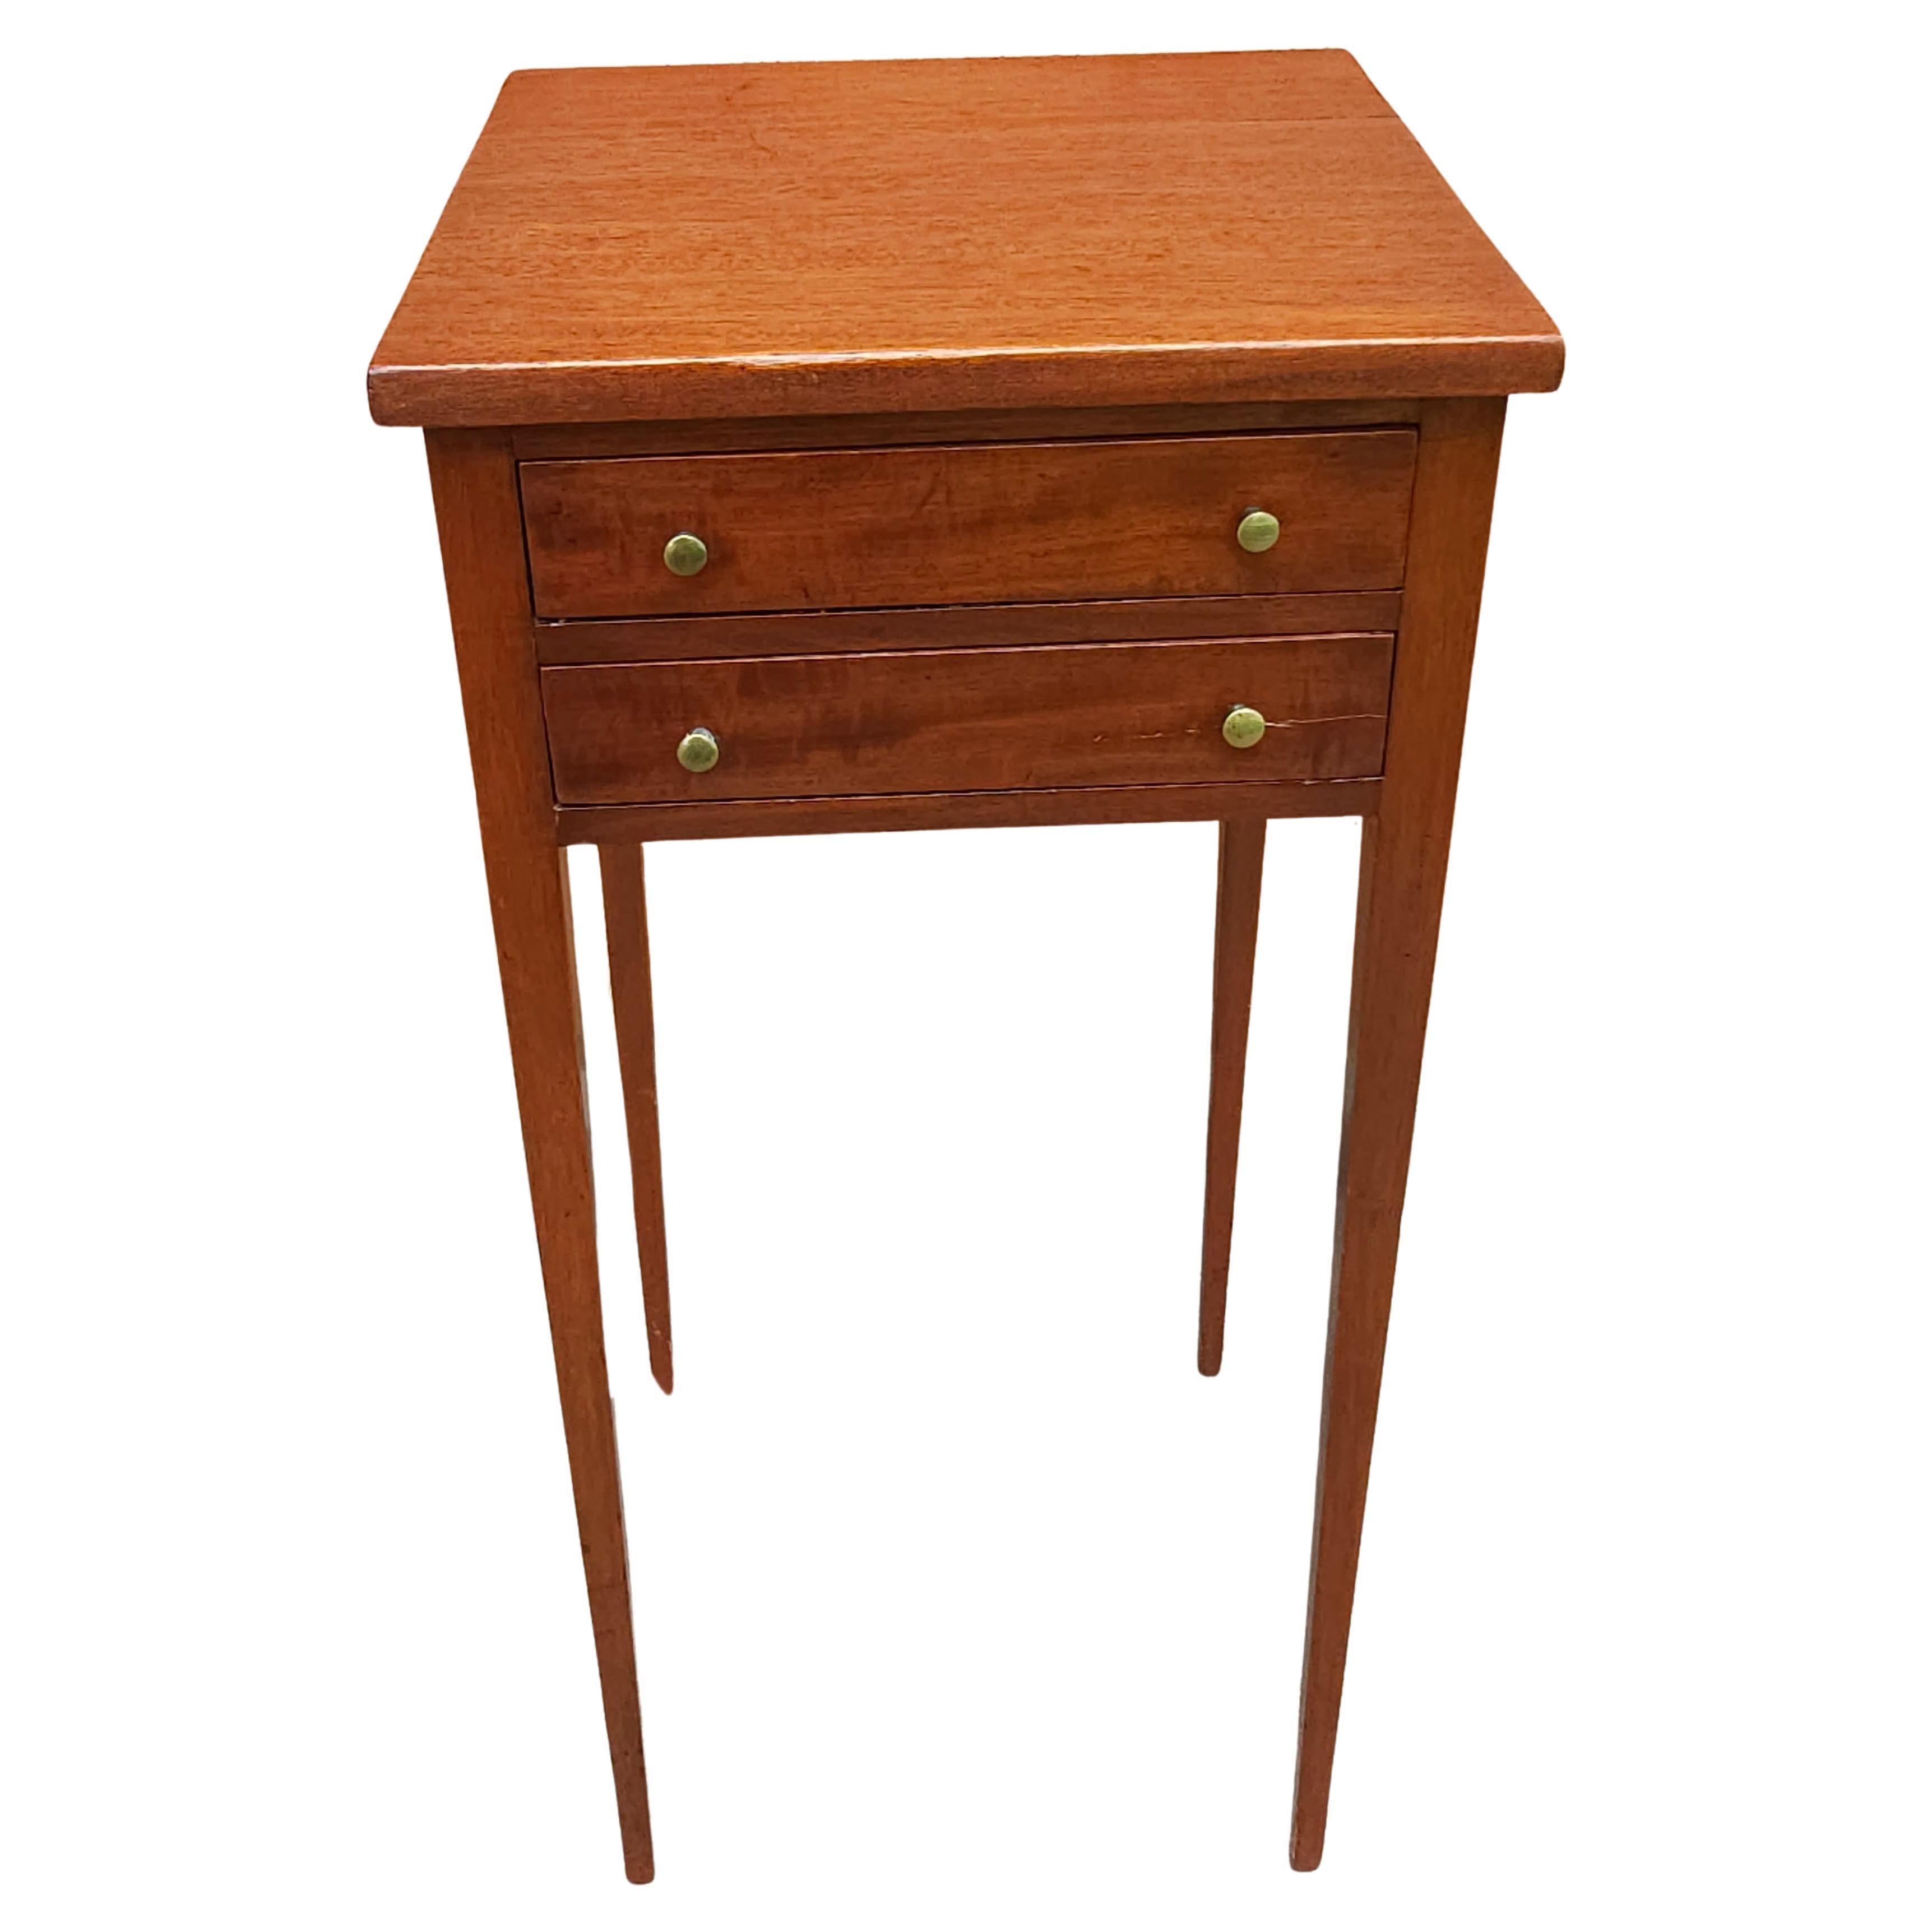 An Early 20th Century Georgian Style Two-Drawer Mahogany Side Table
Tables measures 14